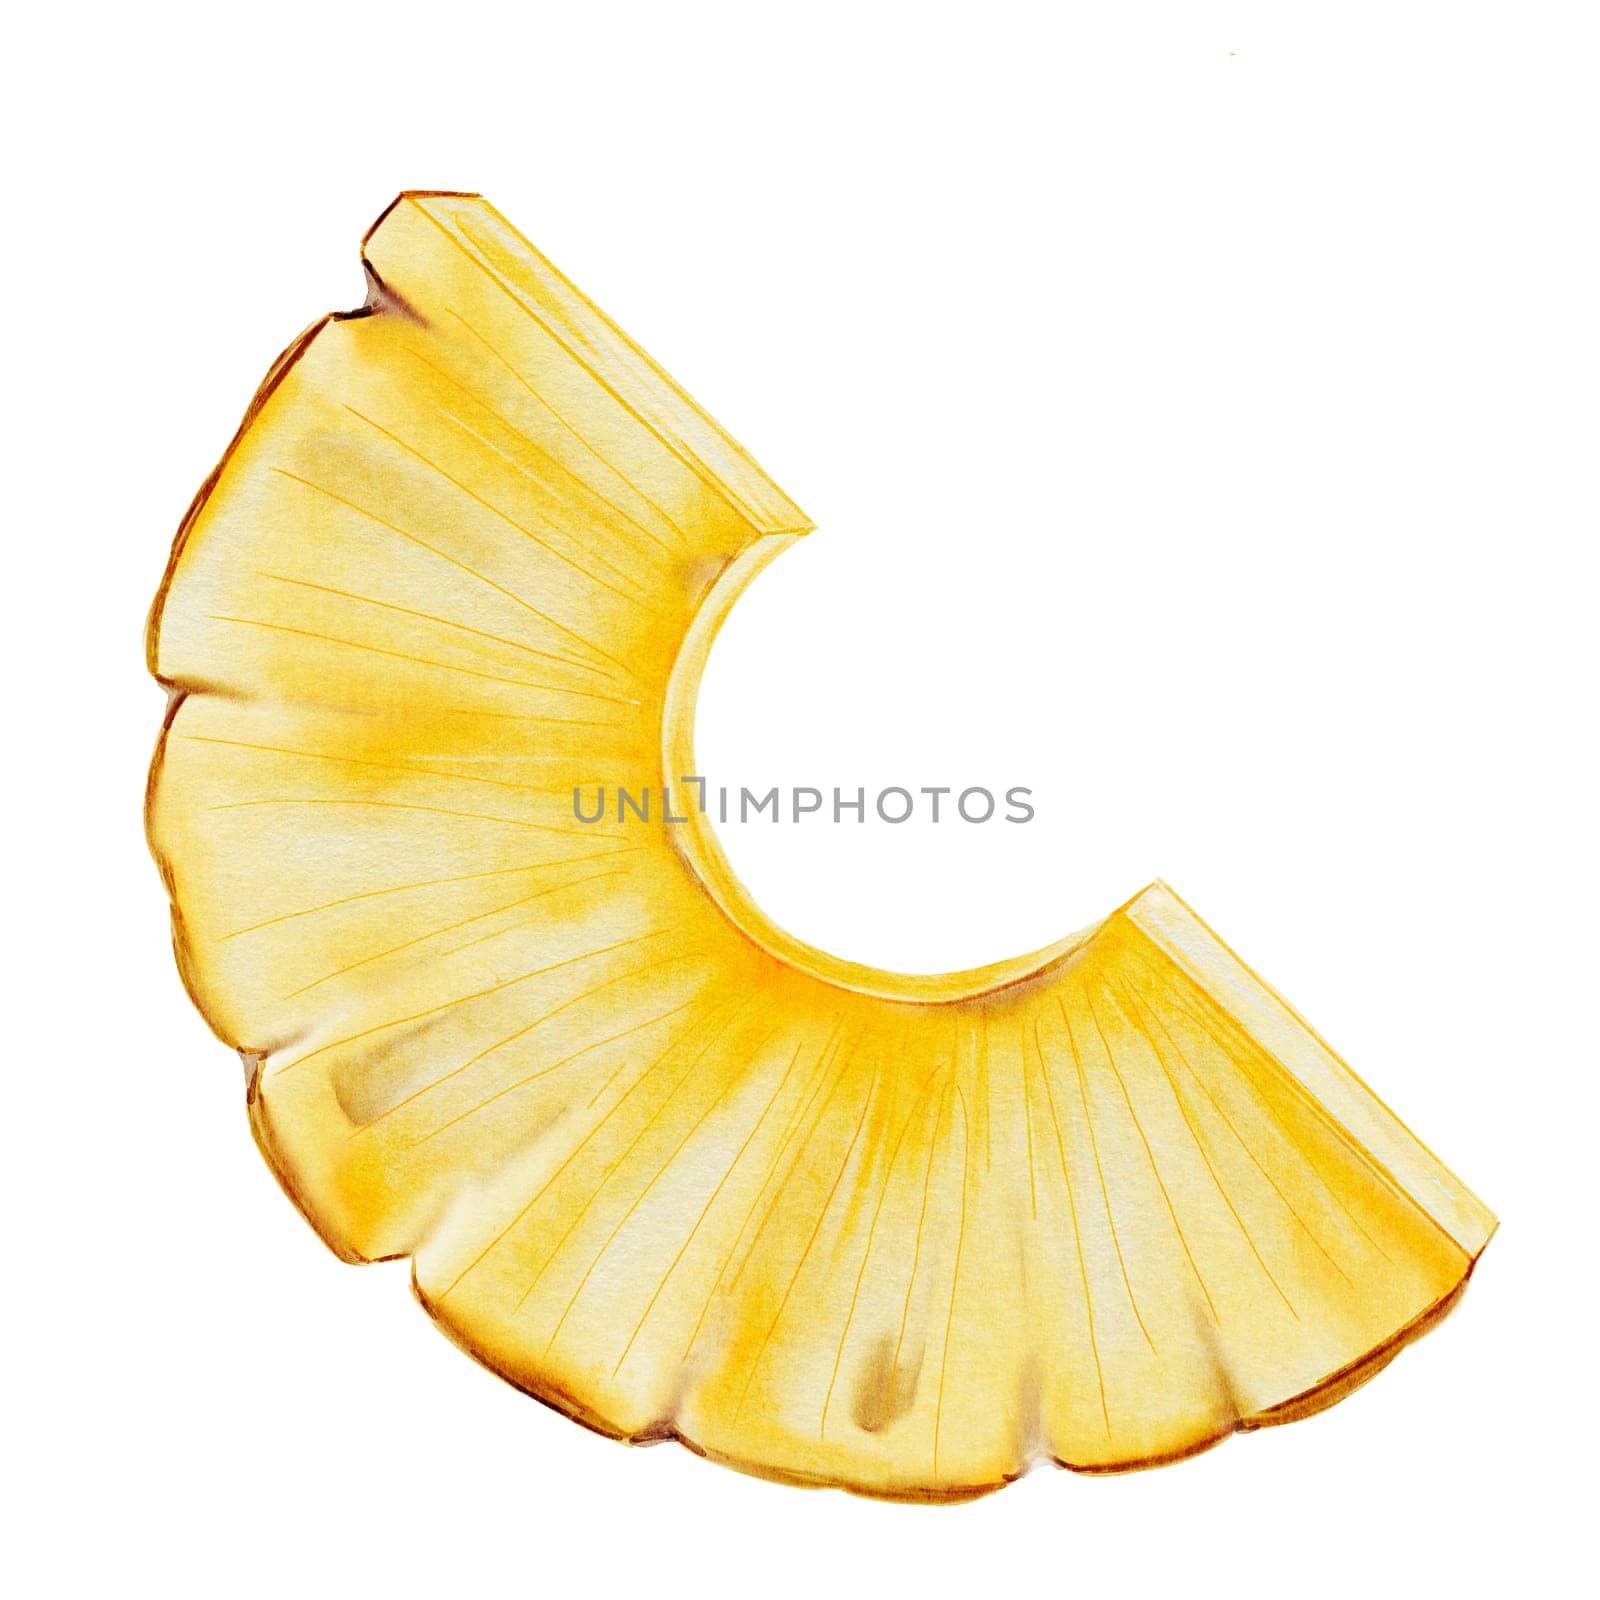 Pineapple slice watercolor. Hand drawn isolated drawing on white background. Clip art of ripe tropical fruit. For the design of exotic cocktail menus and cosmetics packaging. Food illustration by TatyanaTrushcheleva